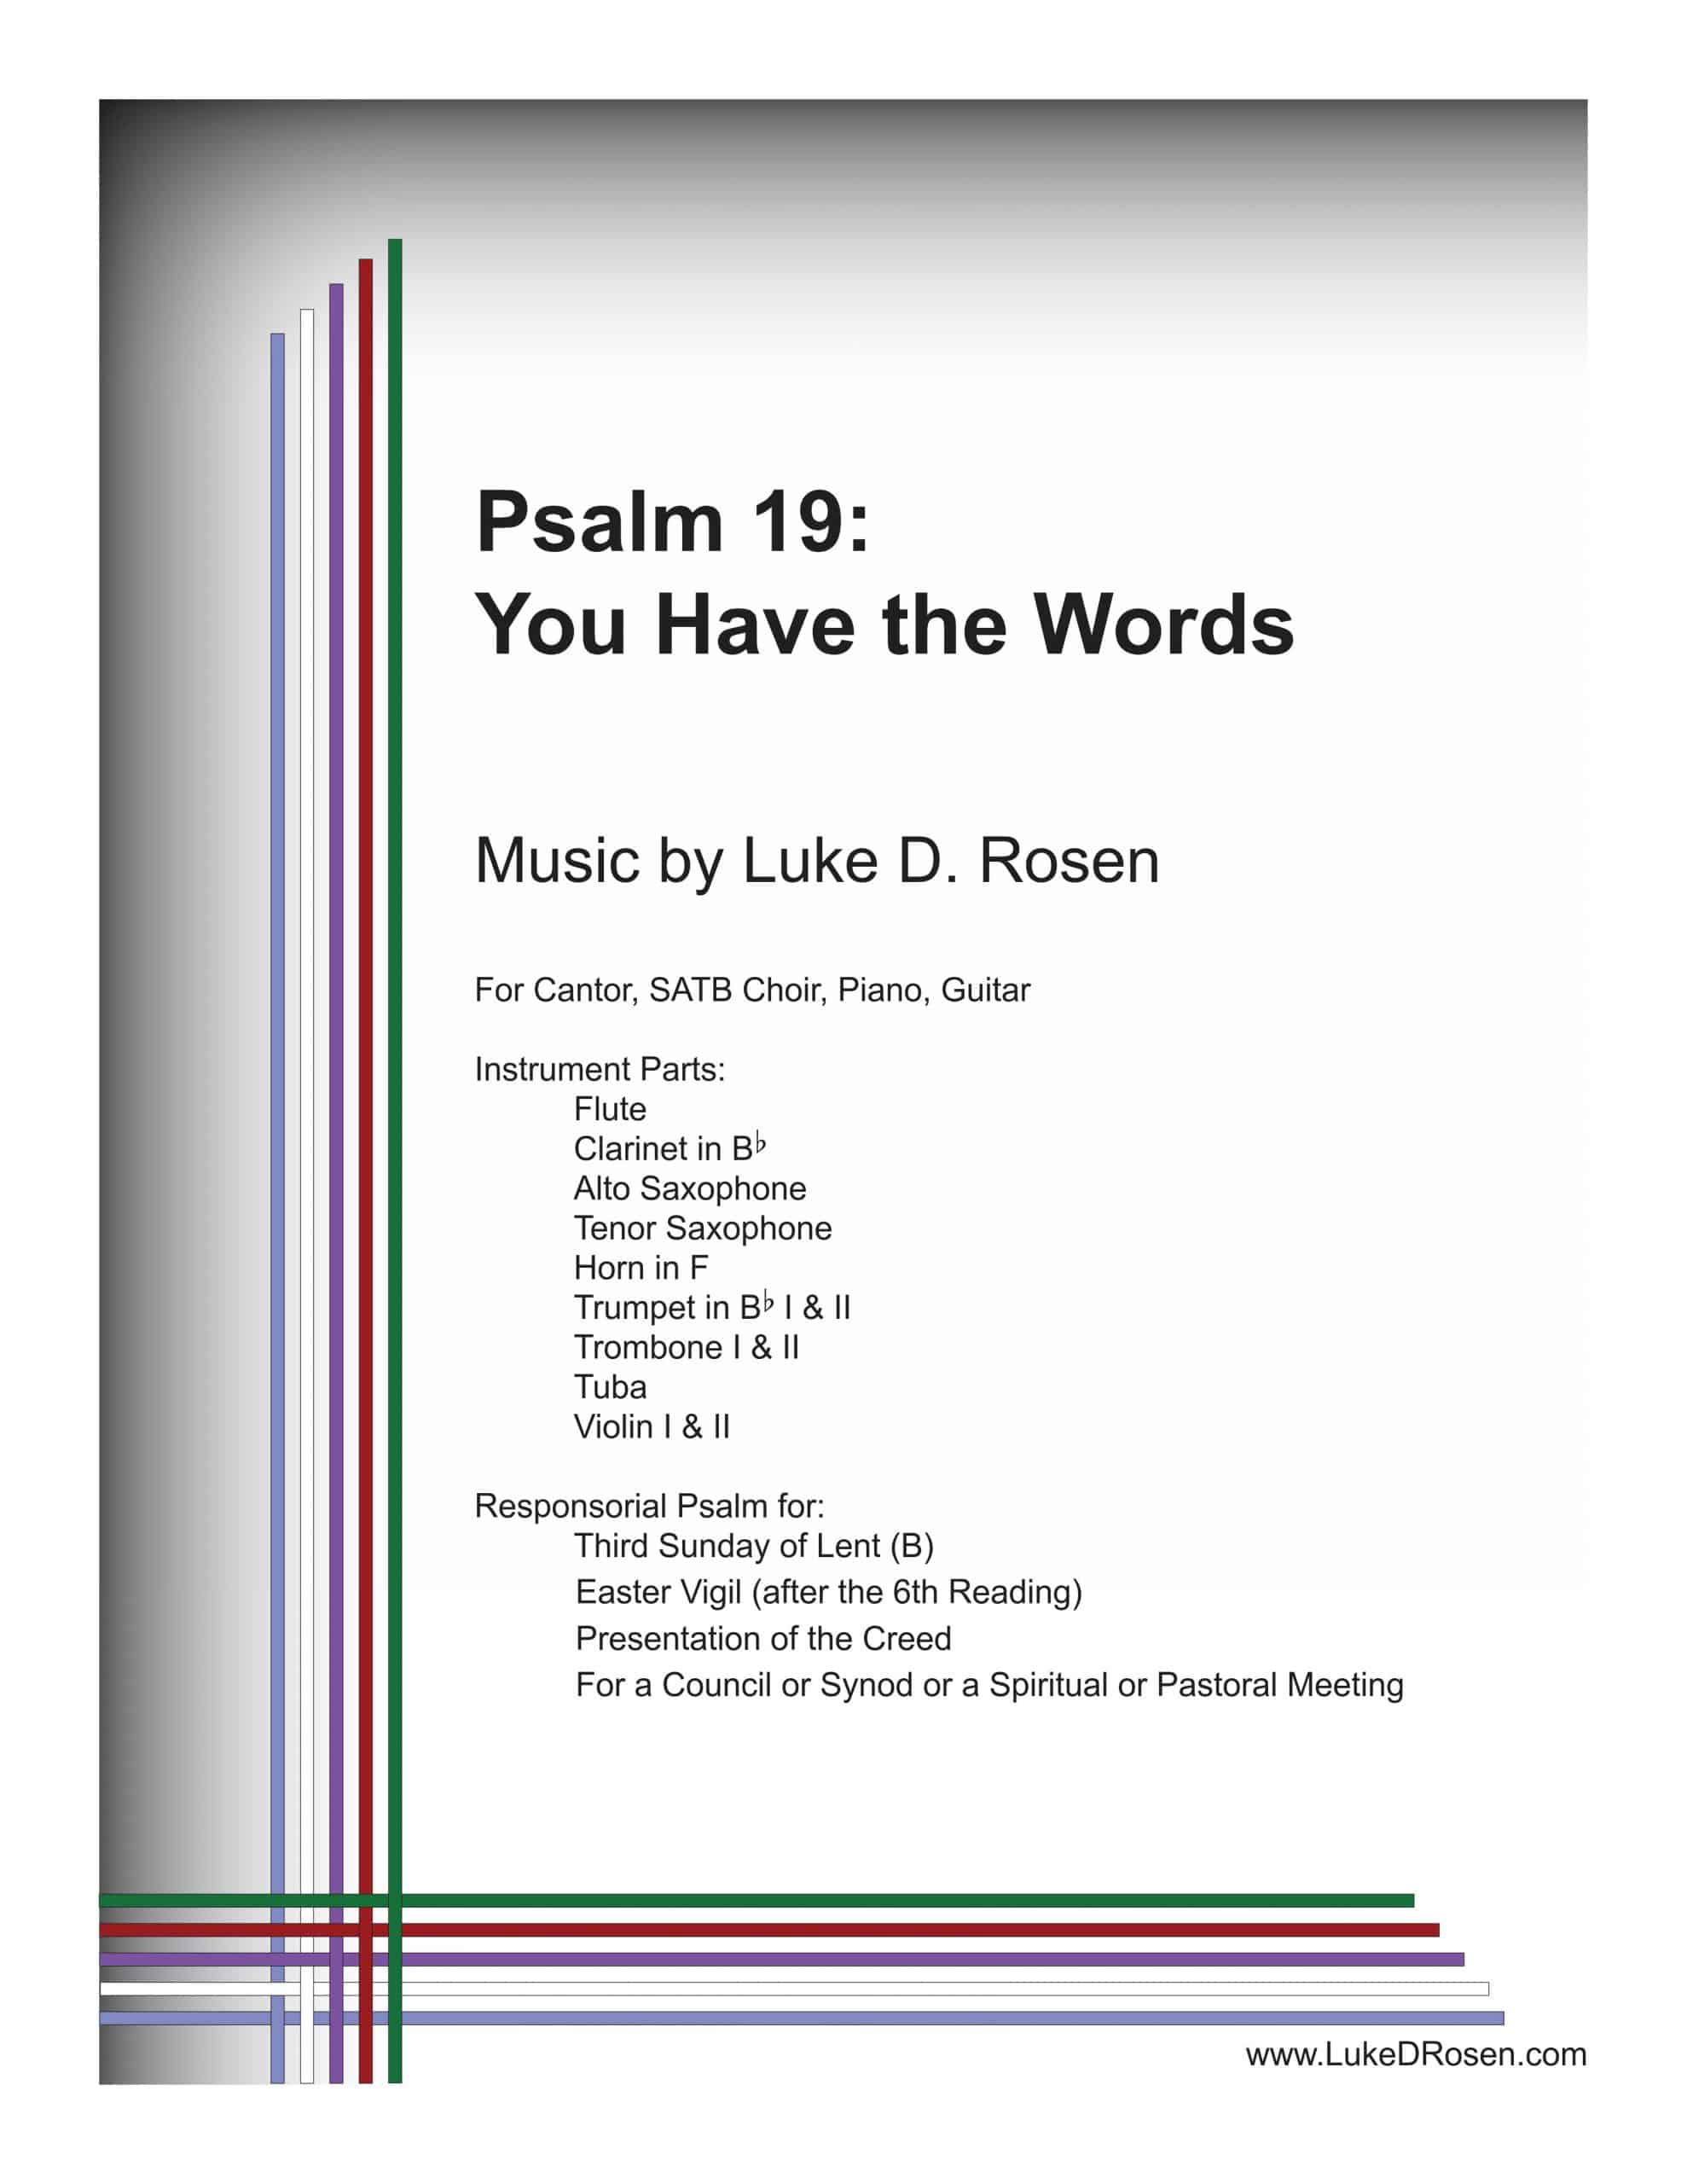 Psalm 19 – You Have the Words (Rosen)